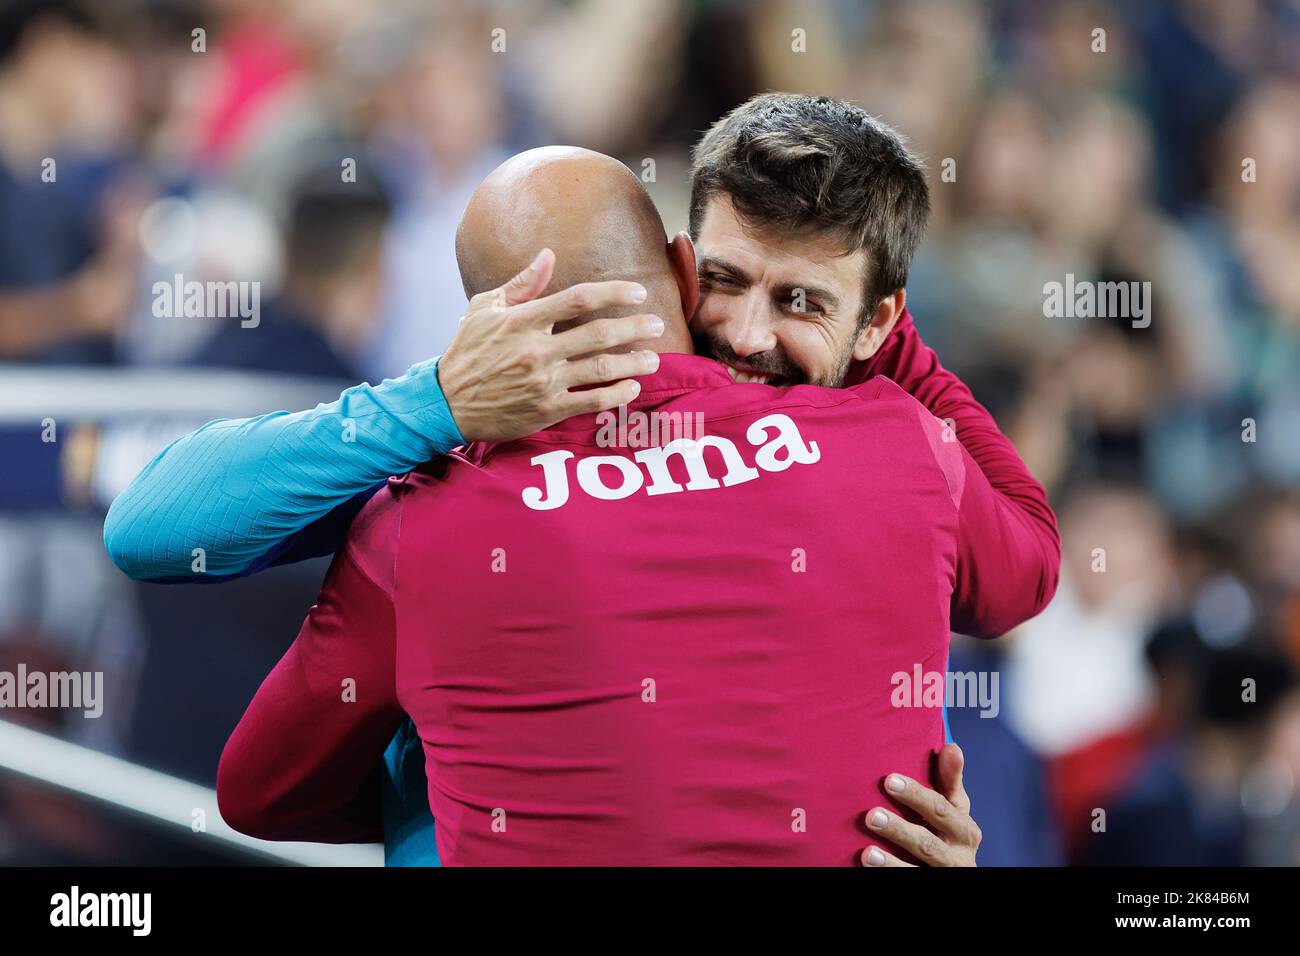 Barcelona, Spain. 20th Oct, 2022. Pique salutes Reina prior to the La Liga match between FC Barcelona and Villarreal CF at the Spotify Camp Nou Stadium in Barcelona, Spain. Credit: Christian Bertrand/Alamy Live News Stock Photo